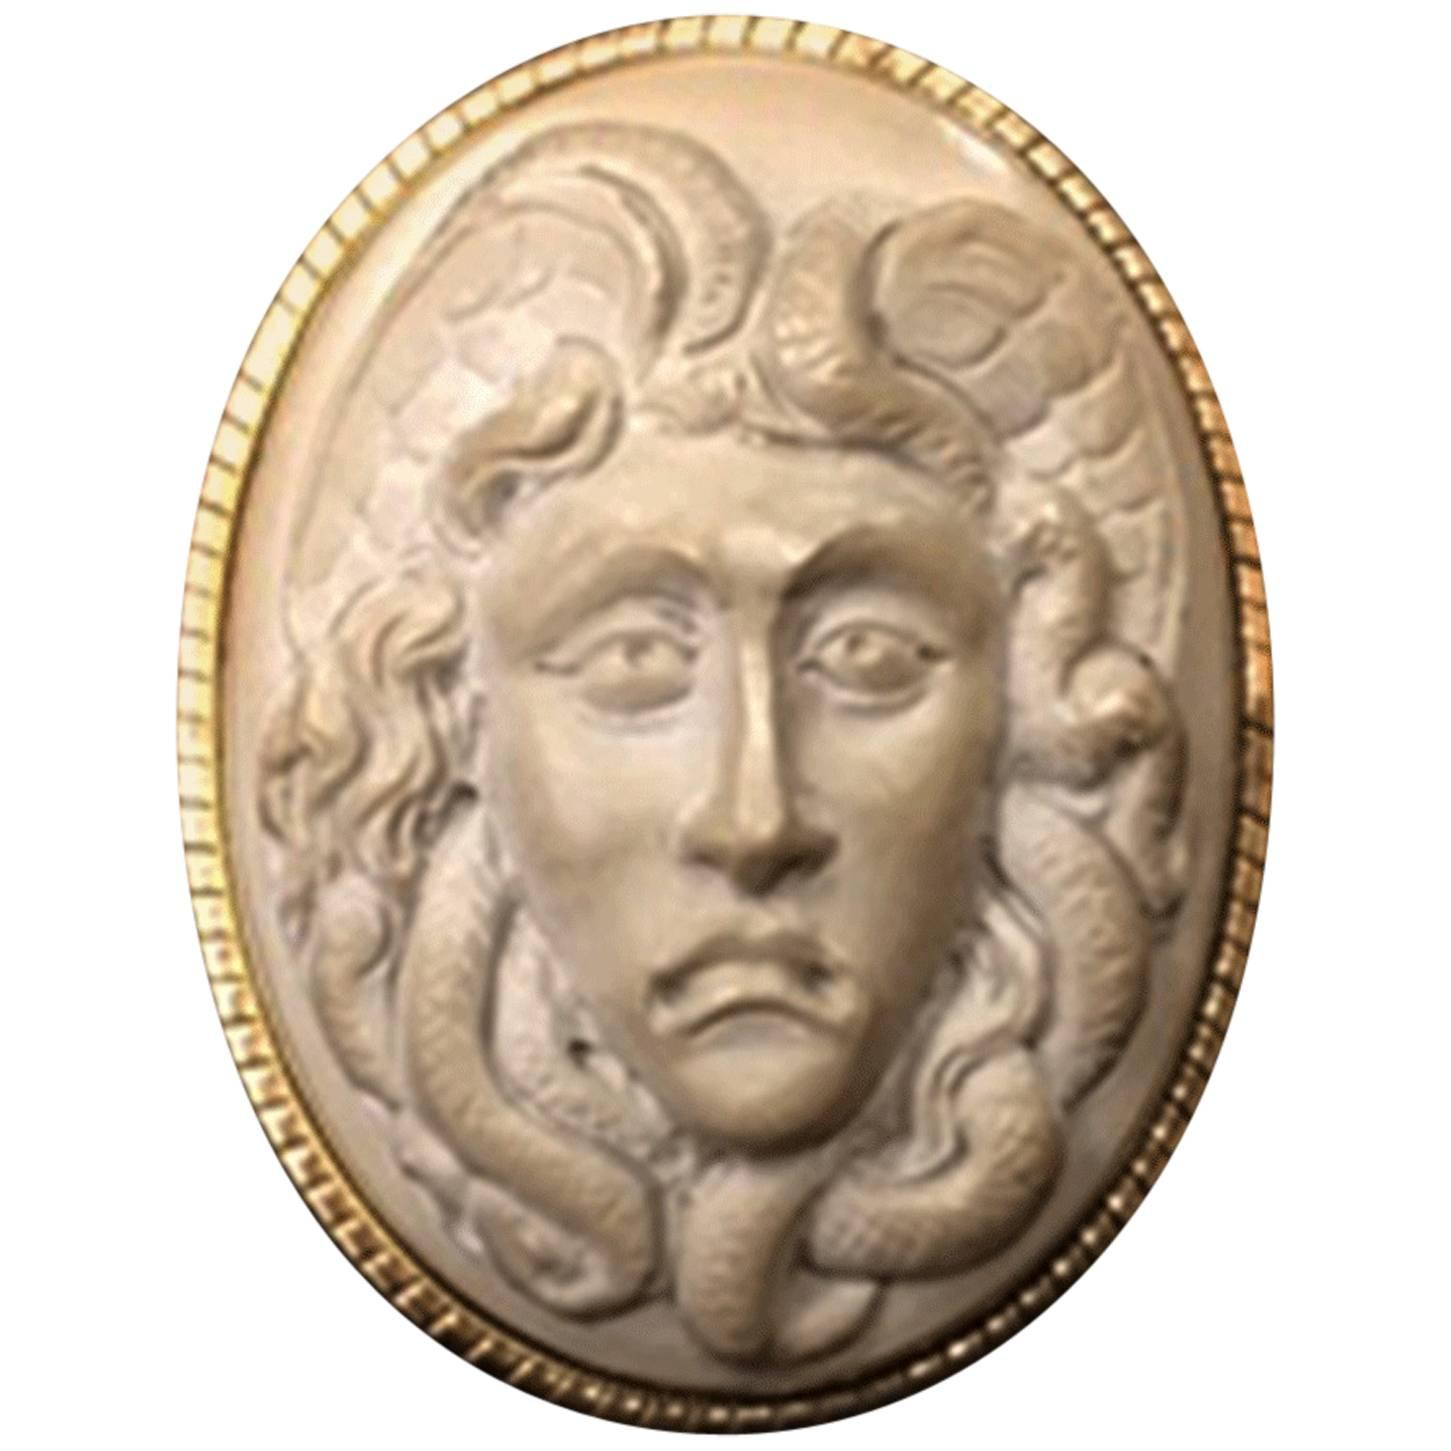 Antique Carved Lava Cameo of Medusa Gold Pin Brooch Pendant